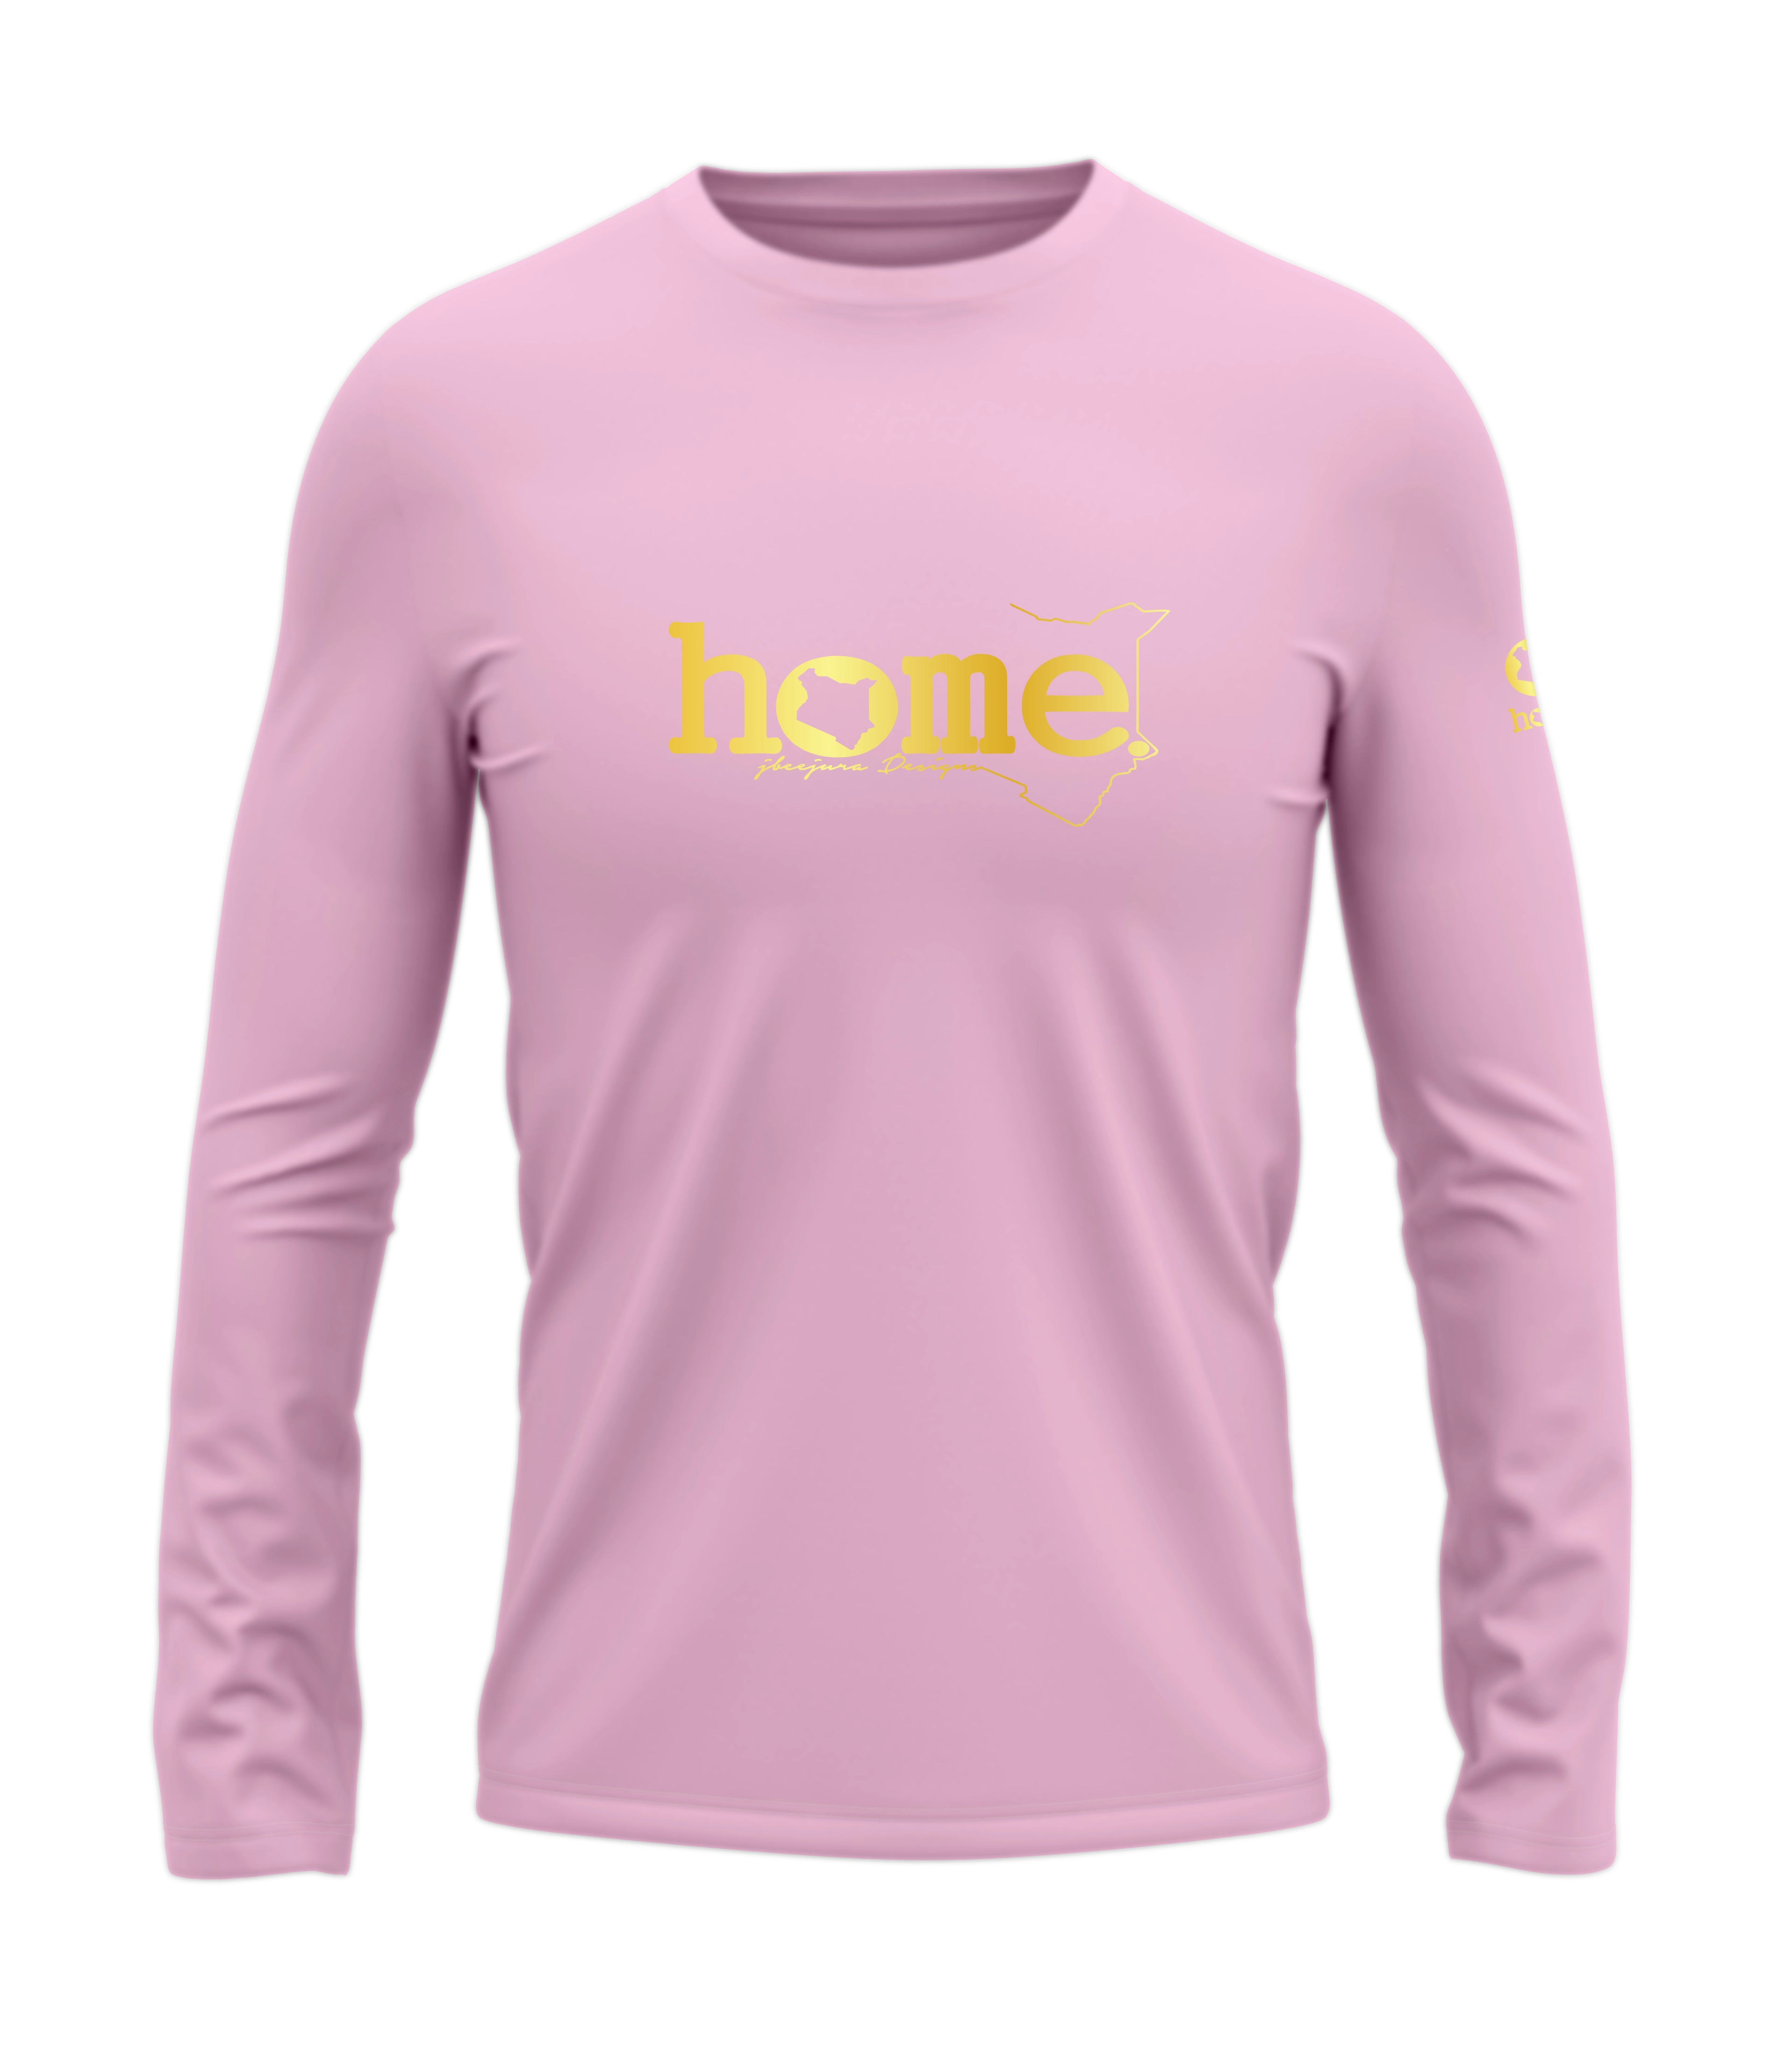 home_254 LONG-SLEEVED PINK T-SHIRT WITH A GOLD CLASSIC WORDS PRINT – COTTON PLUS FABRIC